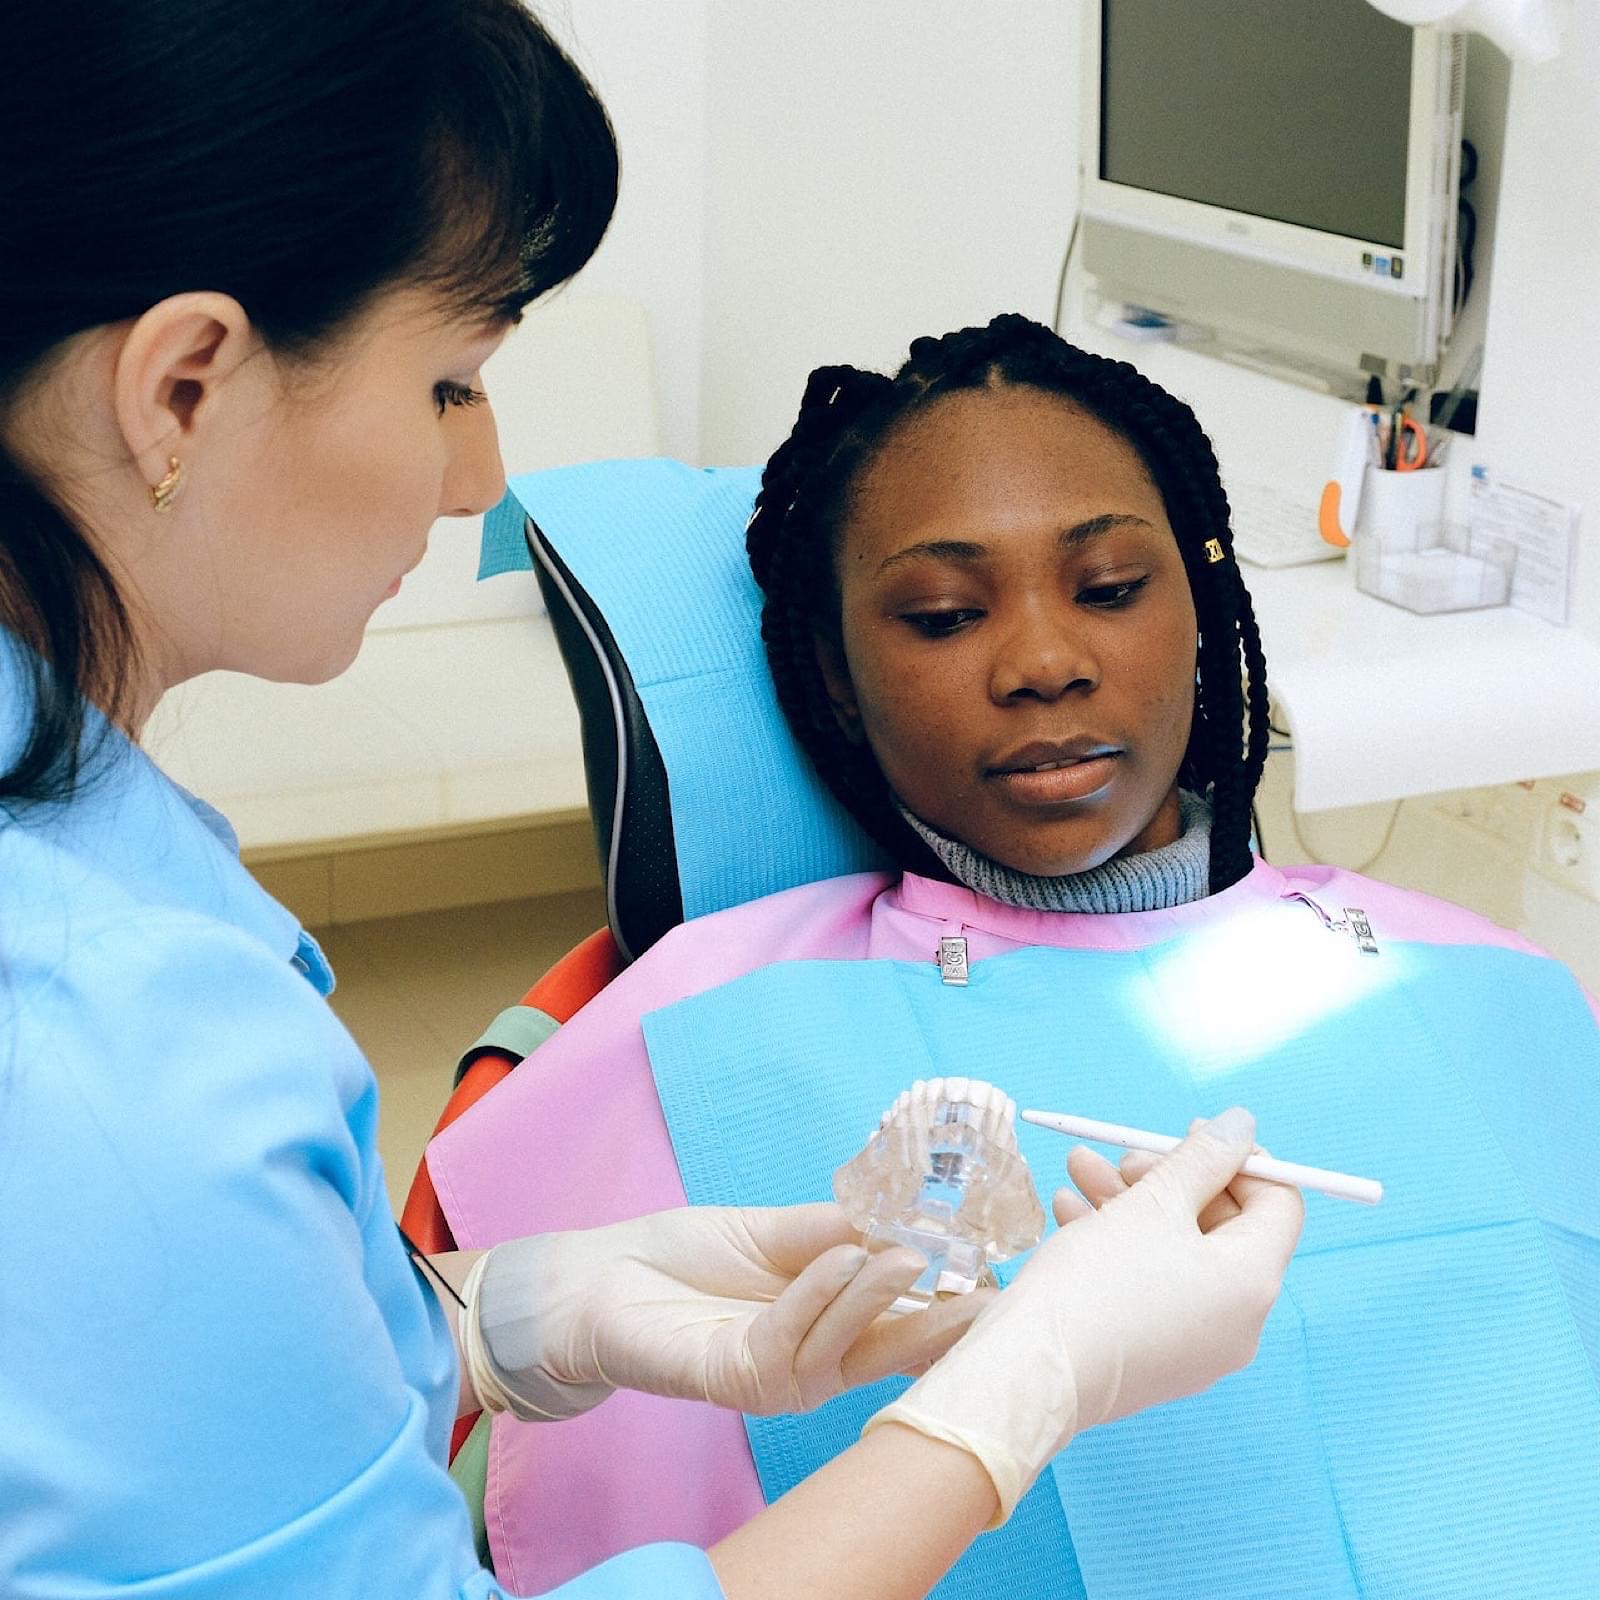 Discover the Benefits of Holistic Dentistry: Why See a Holistic Dentist?